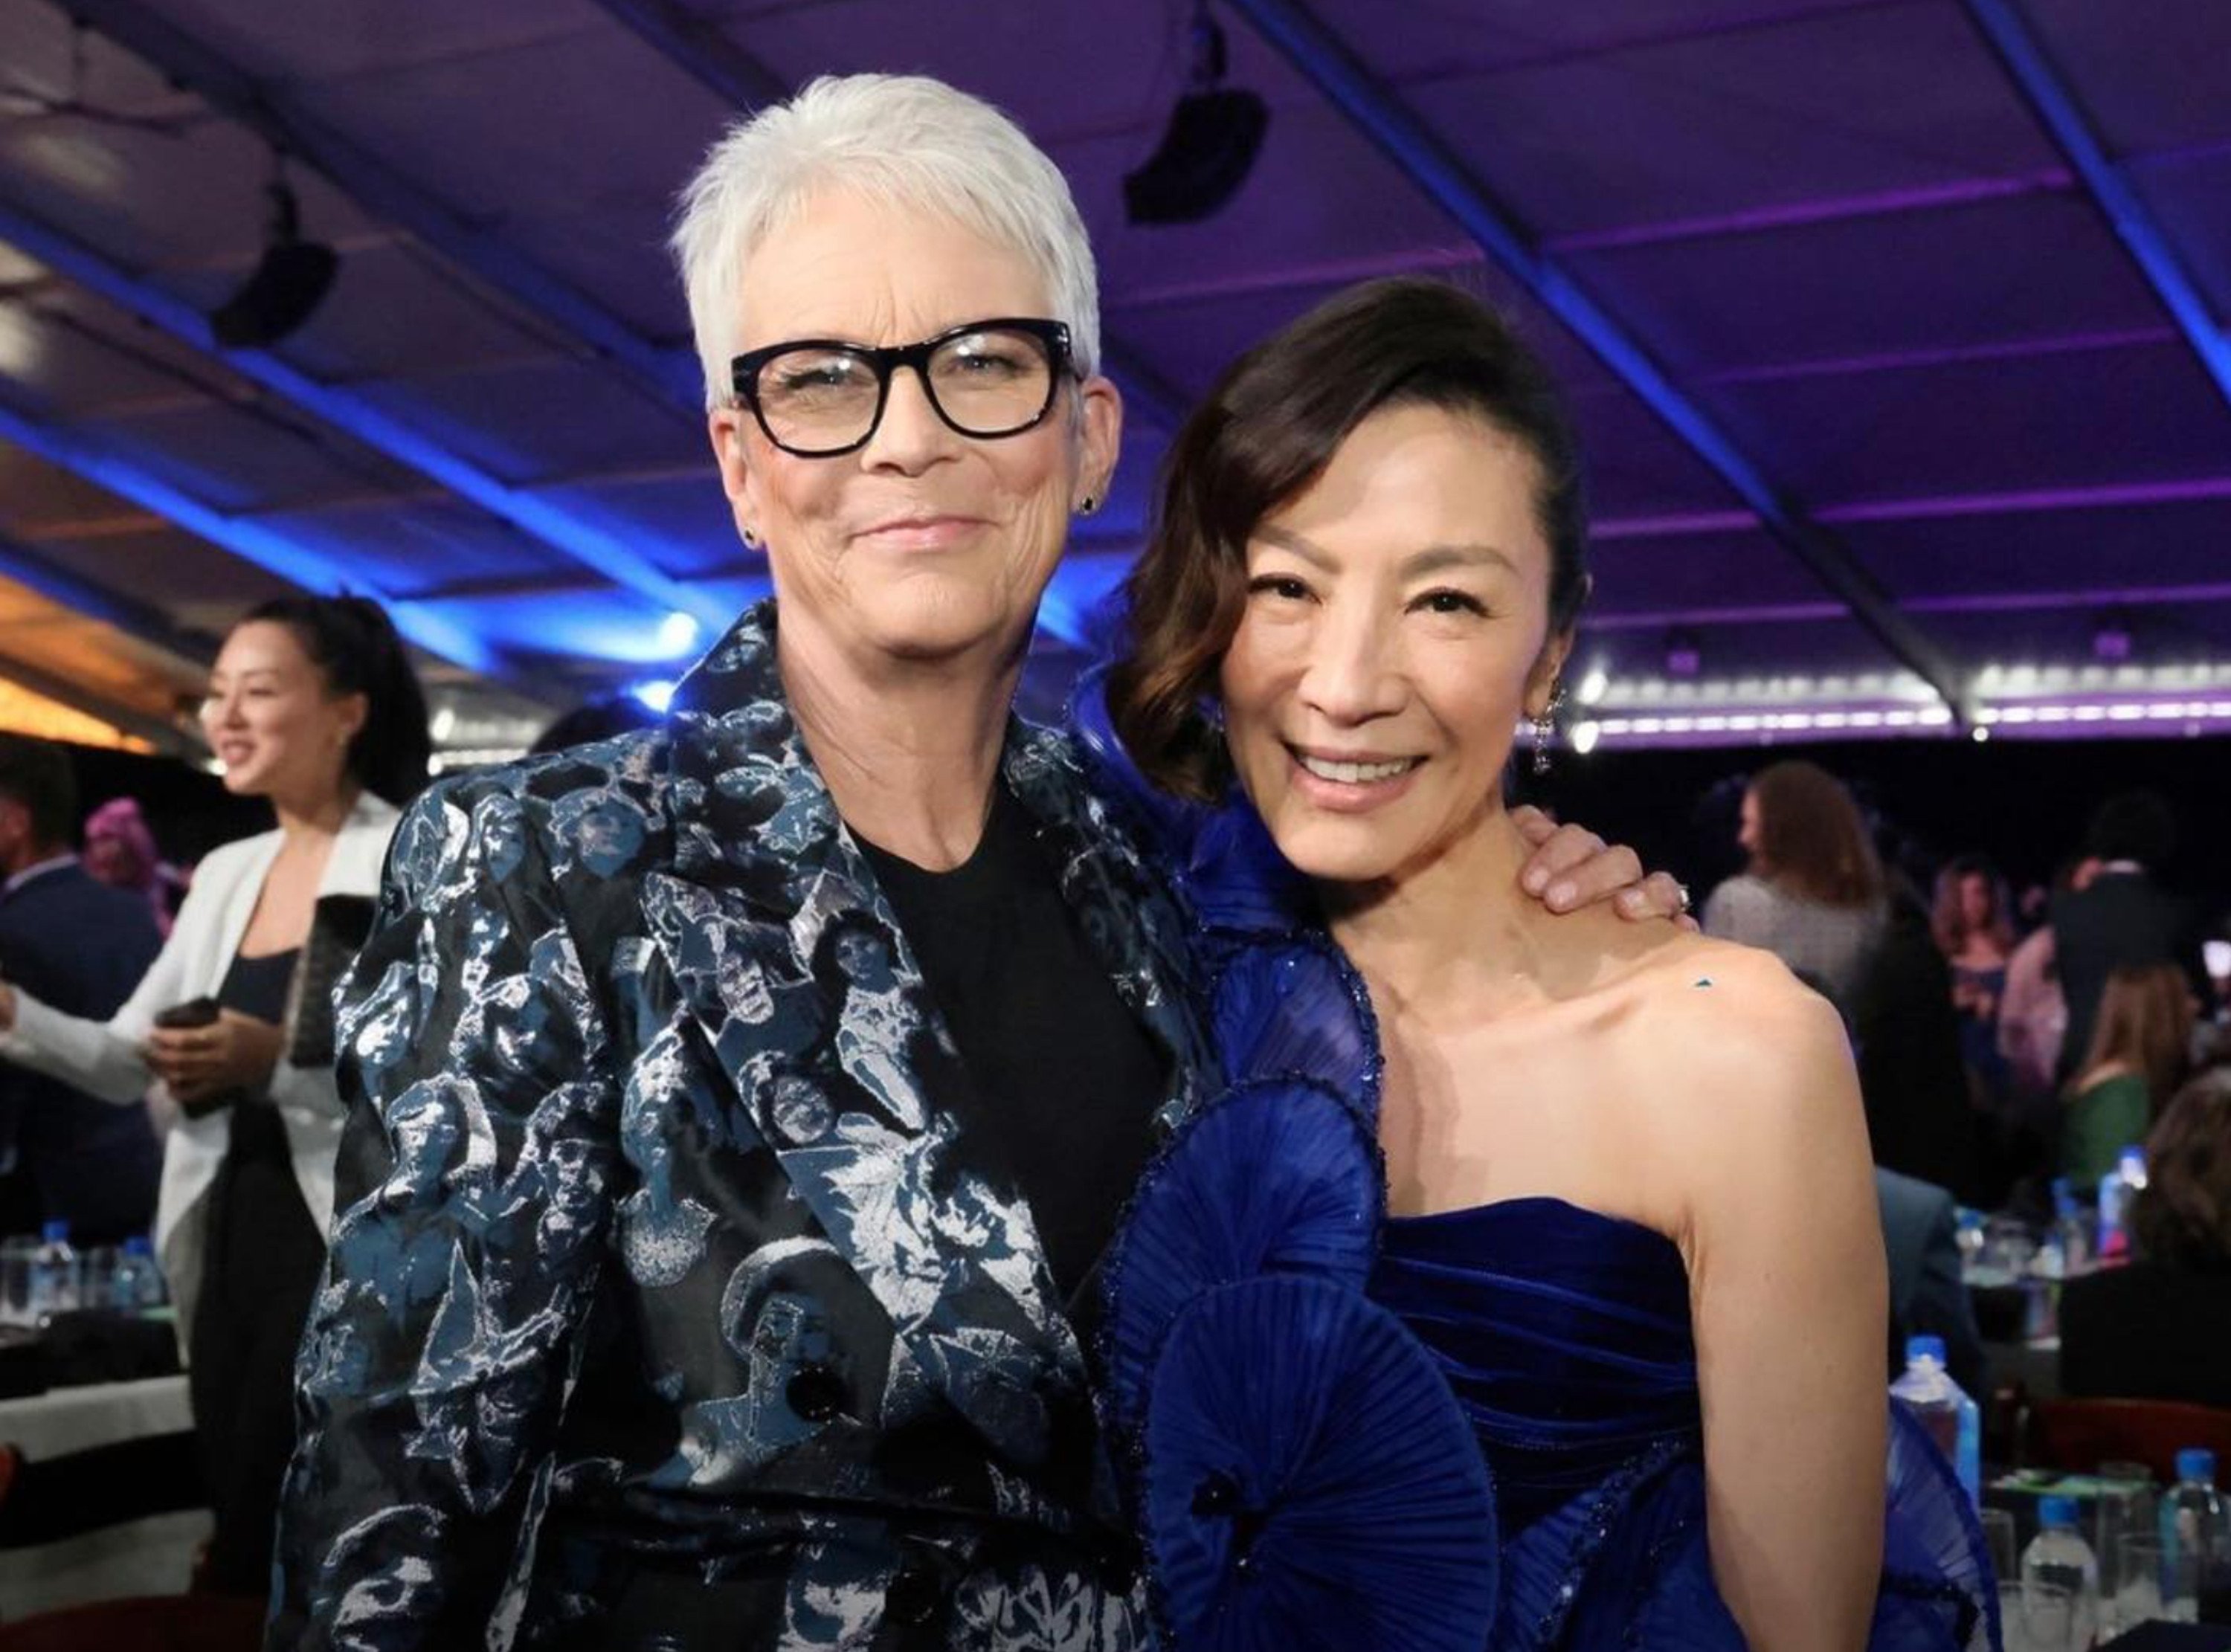 Jamie Lee Curtis and Michelle Yeoh share an authentic friendship that’s rare in Hollywood. Photo: @jamieleecurtis/Instagram